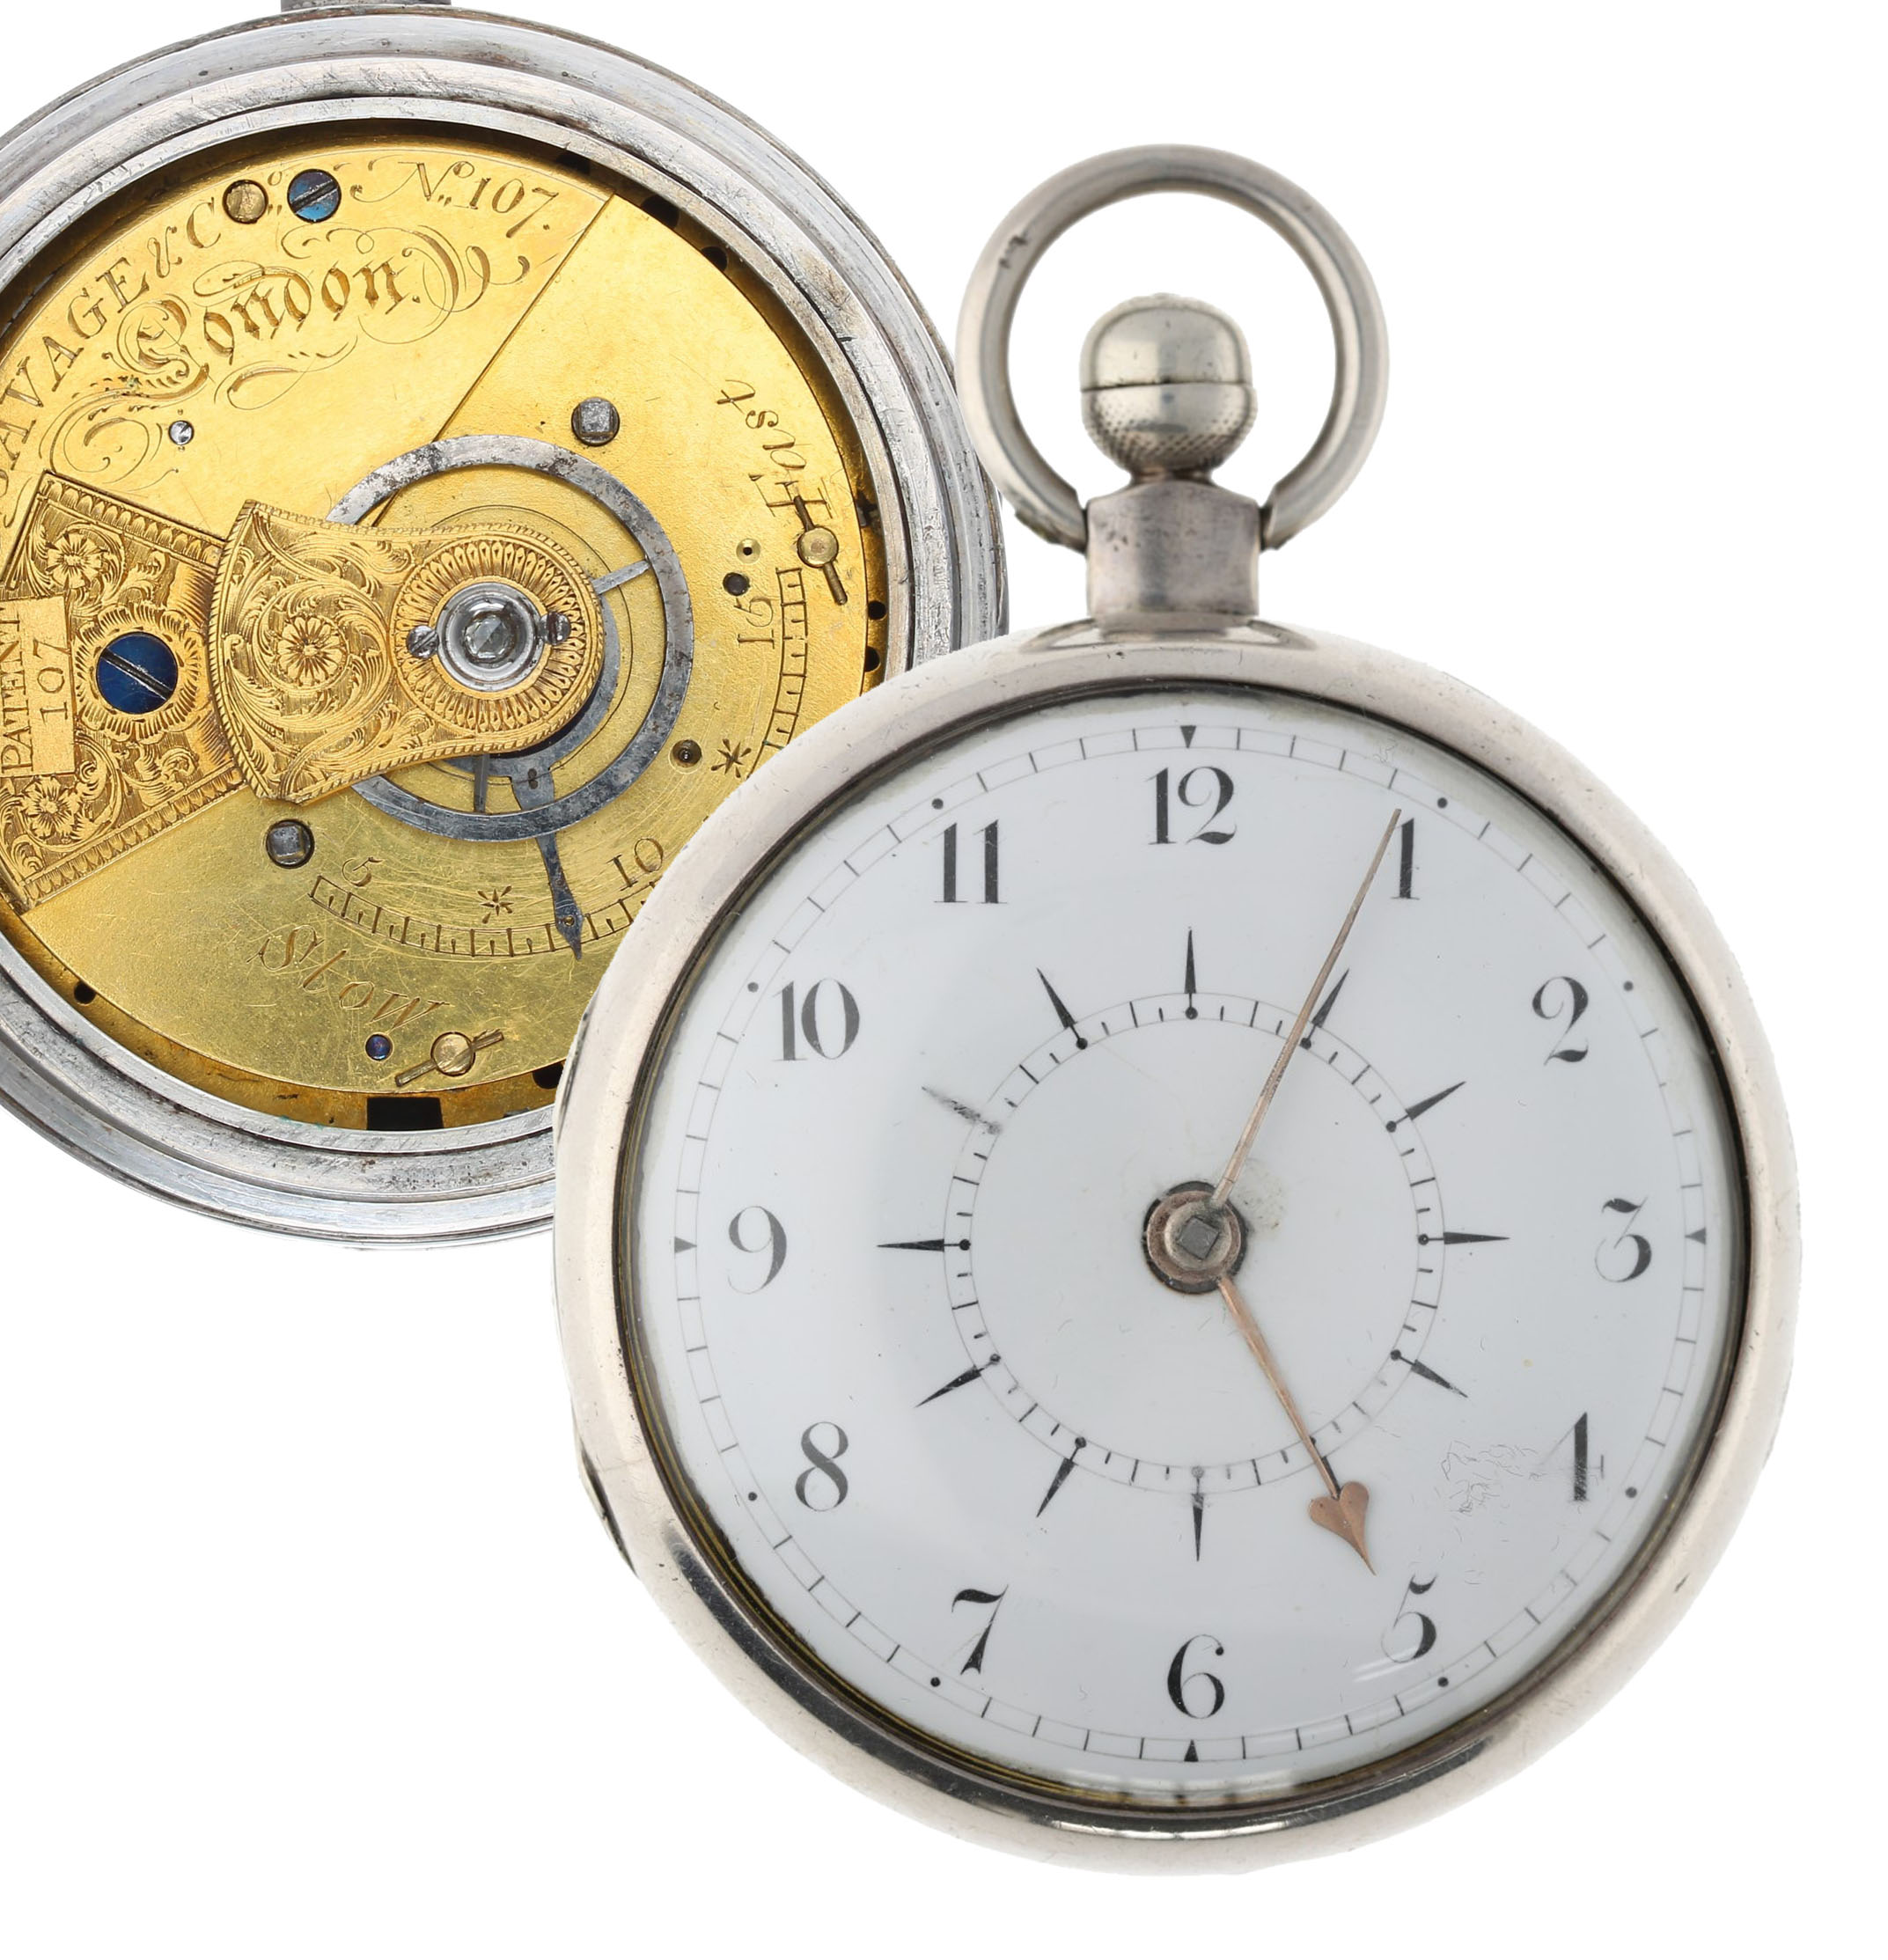 Savage & Co., London - 19th century verge pocket watch with alarm, the fusee movement signed